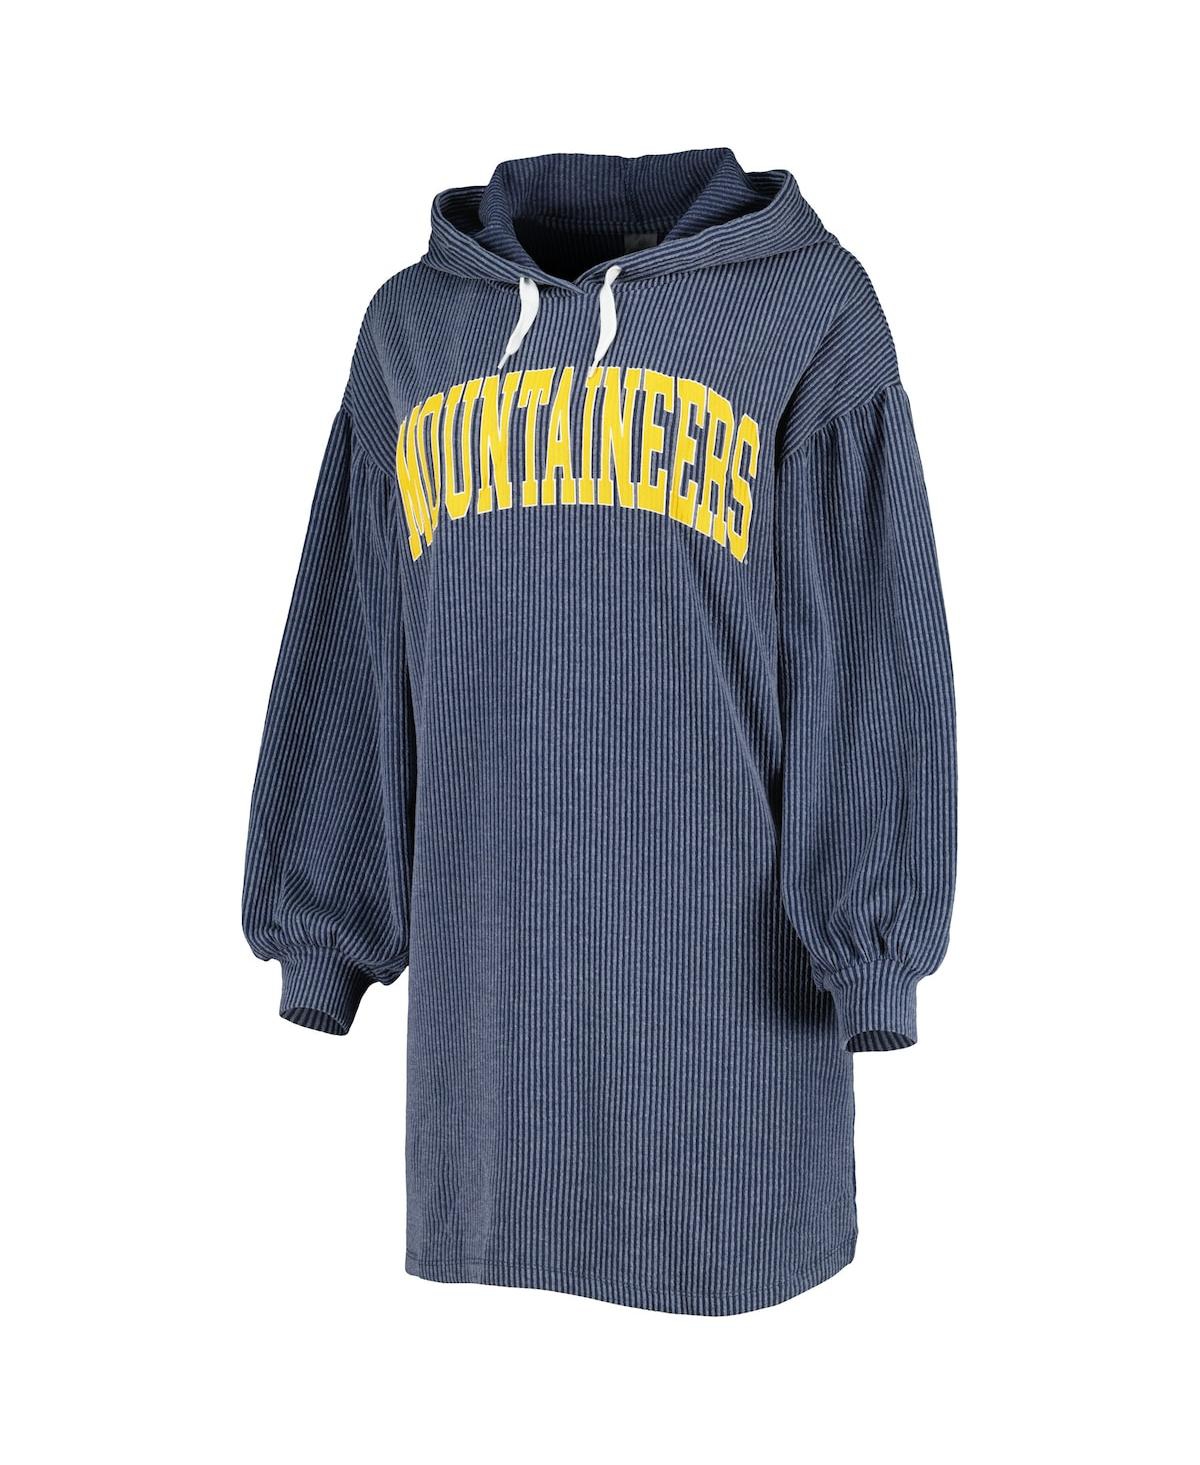 Shop Gameday Couture Women's  Navy Distressed West Virginia Mountaineers Game Winner Vintage-like Wash Tri